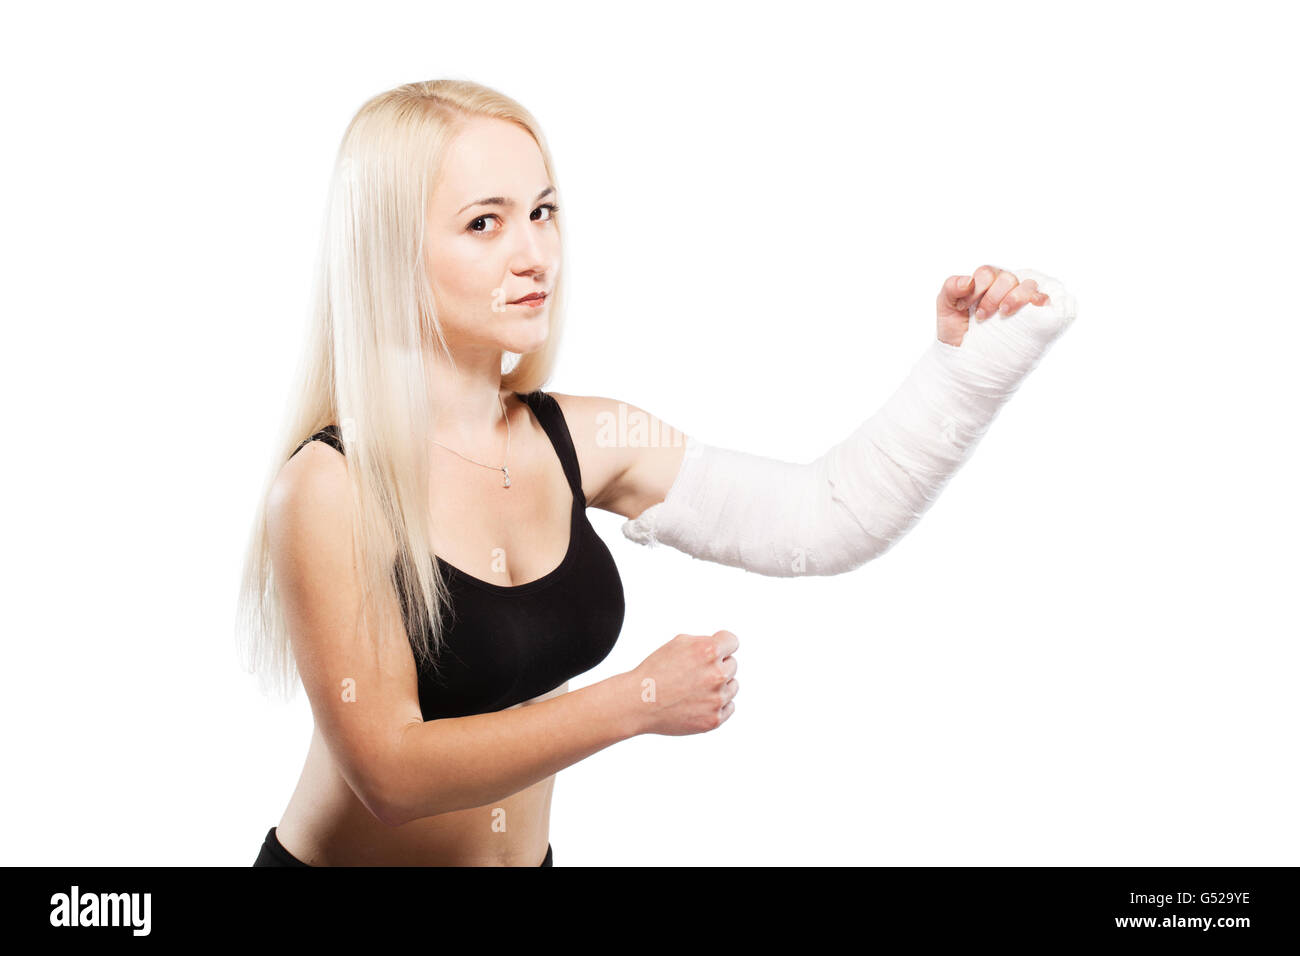 Fitness blond girl with a broken arm in plaster, boxing pose Stock Photo